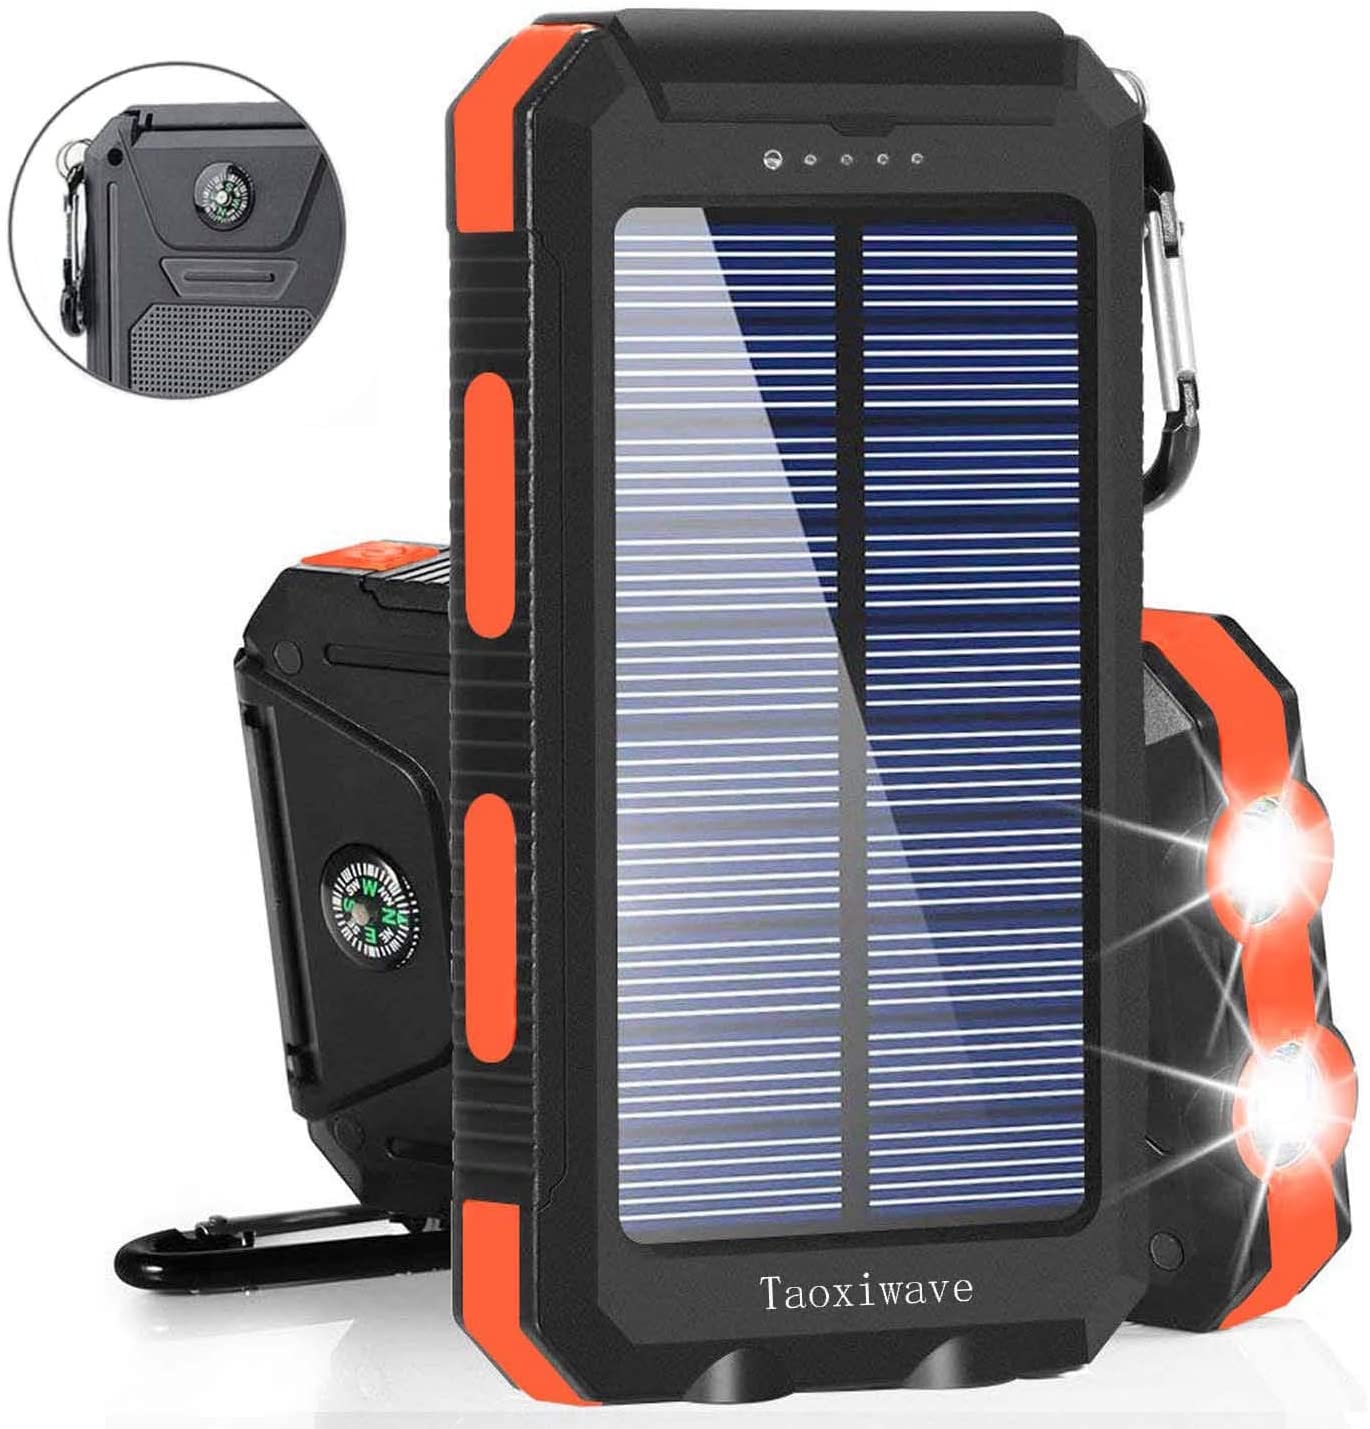 High Capacity Backup Battery Power Bank for Outdoor Camping Emergency Soyond Wireless Qi Portable Charger Dual USB Solar Phone Charger Black Solar Charger Solar Power Bank 26800mAh 